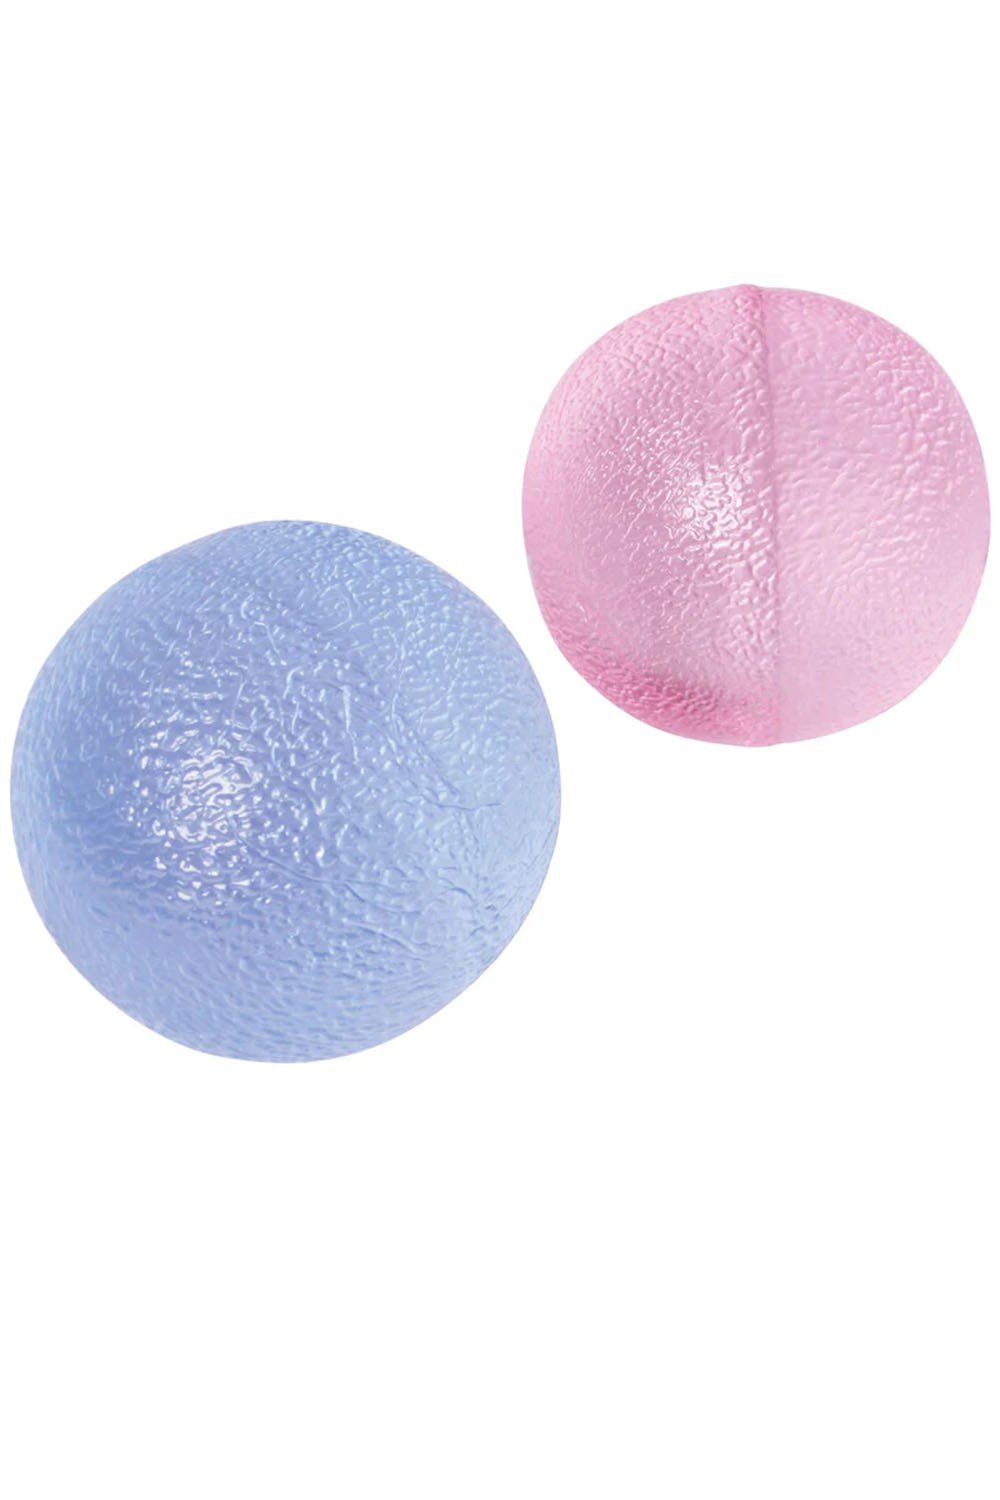 Hand Therapy Balls 2-Pack -